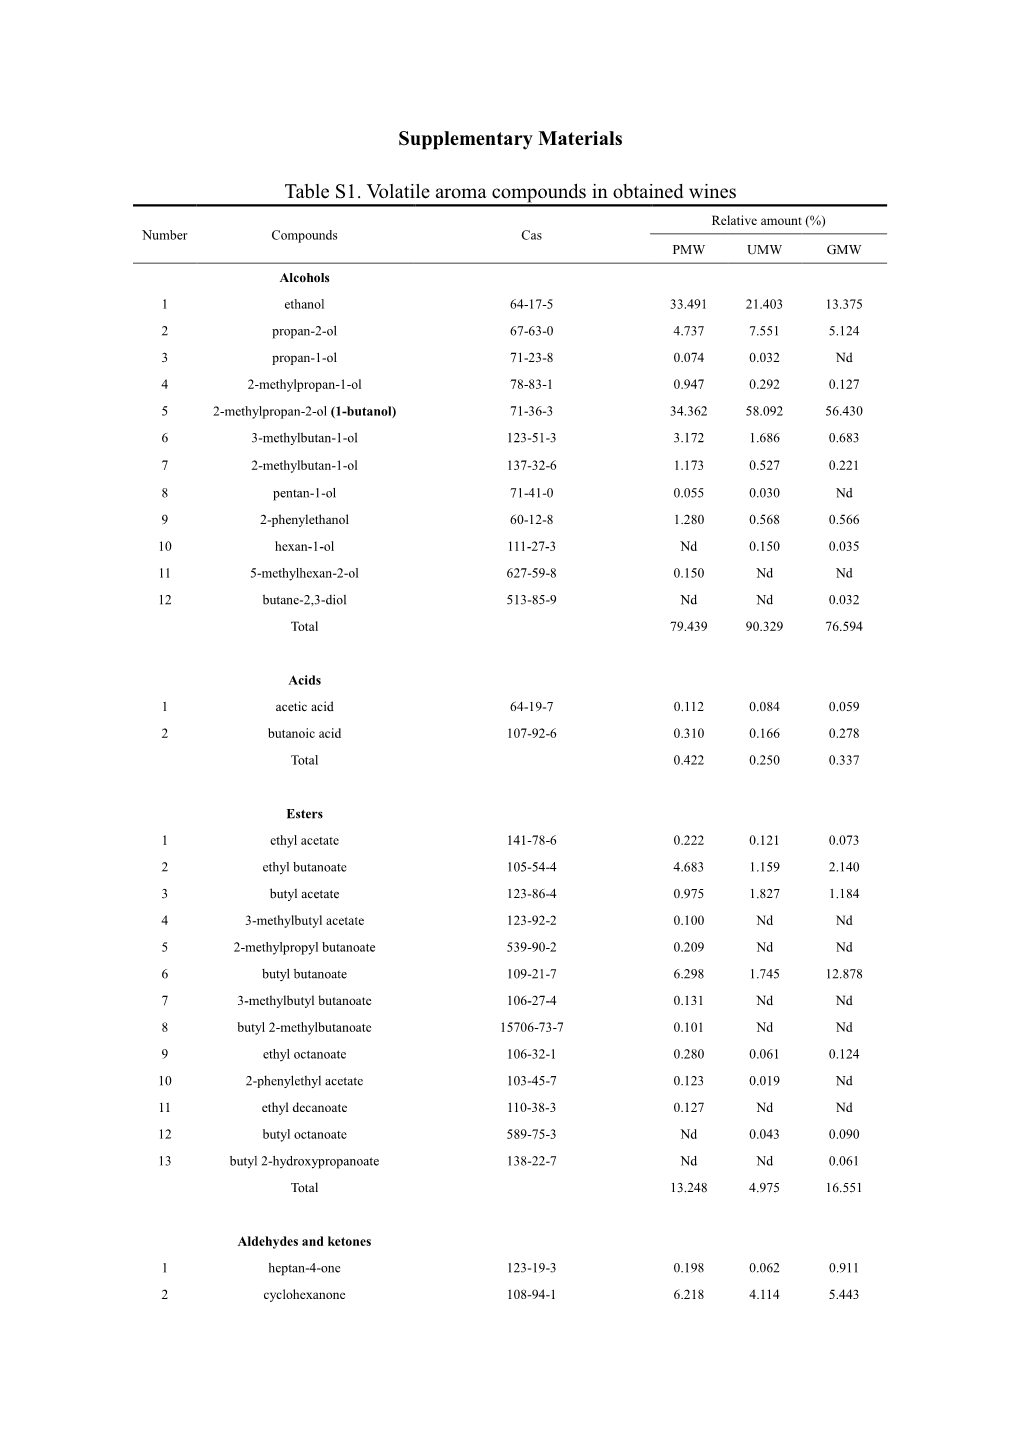 Supplementary Materials Table S1. Volatile Aroma Compounds In